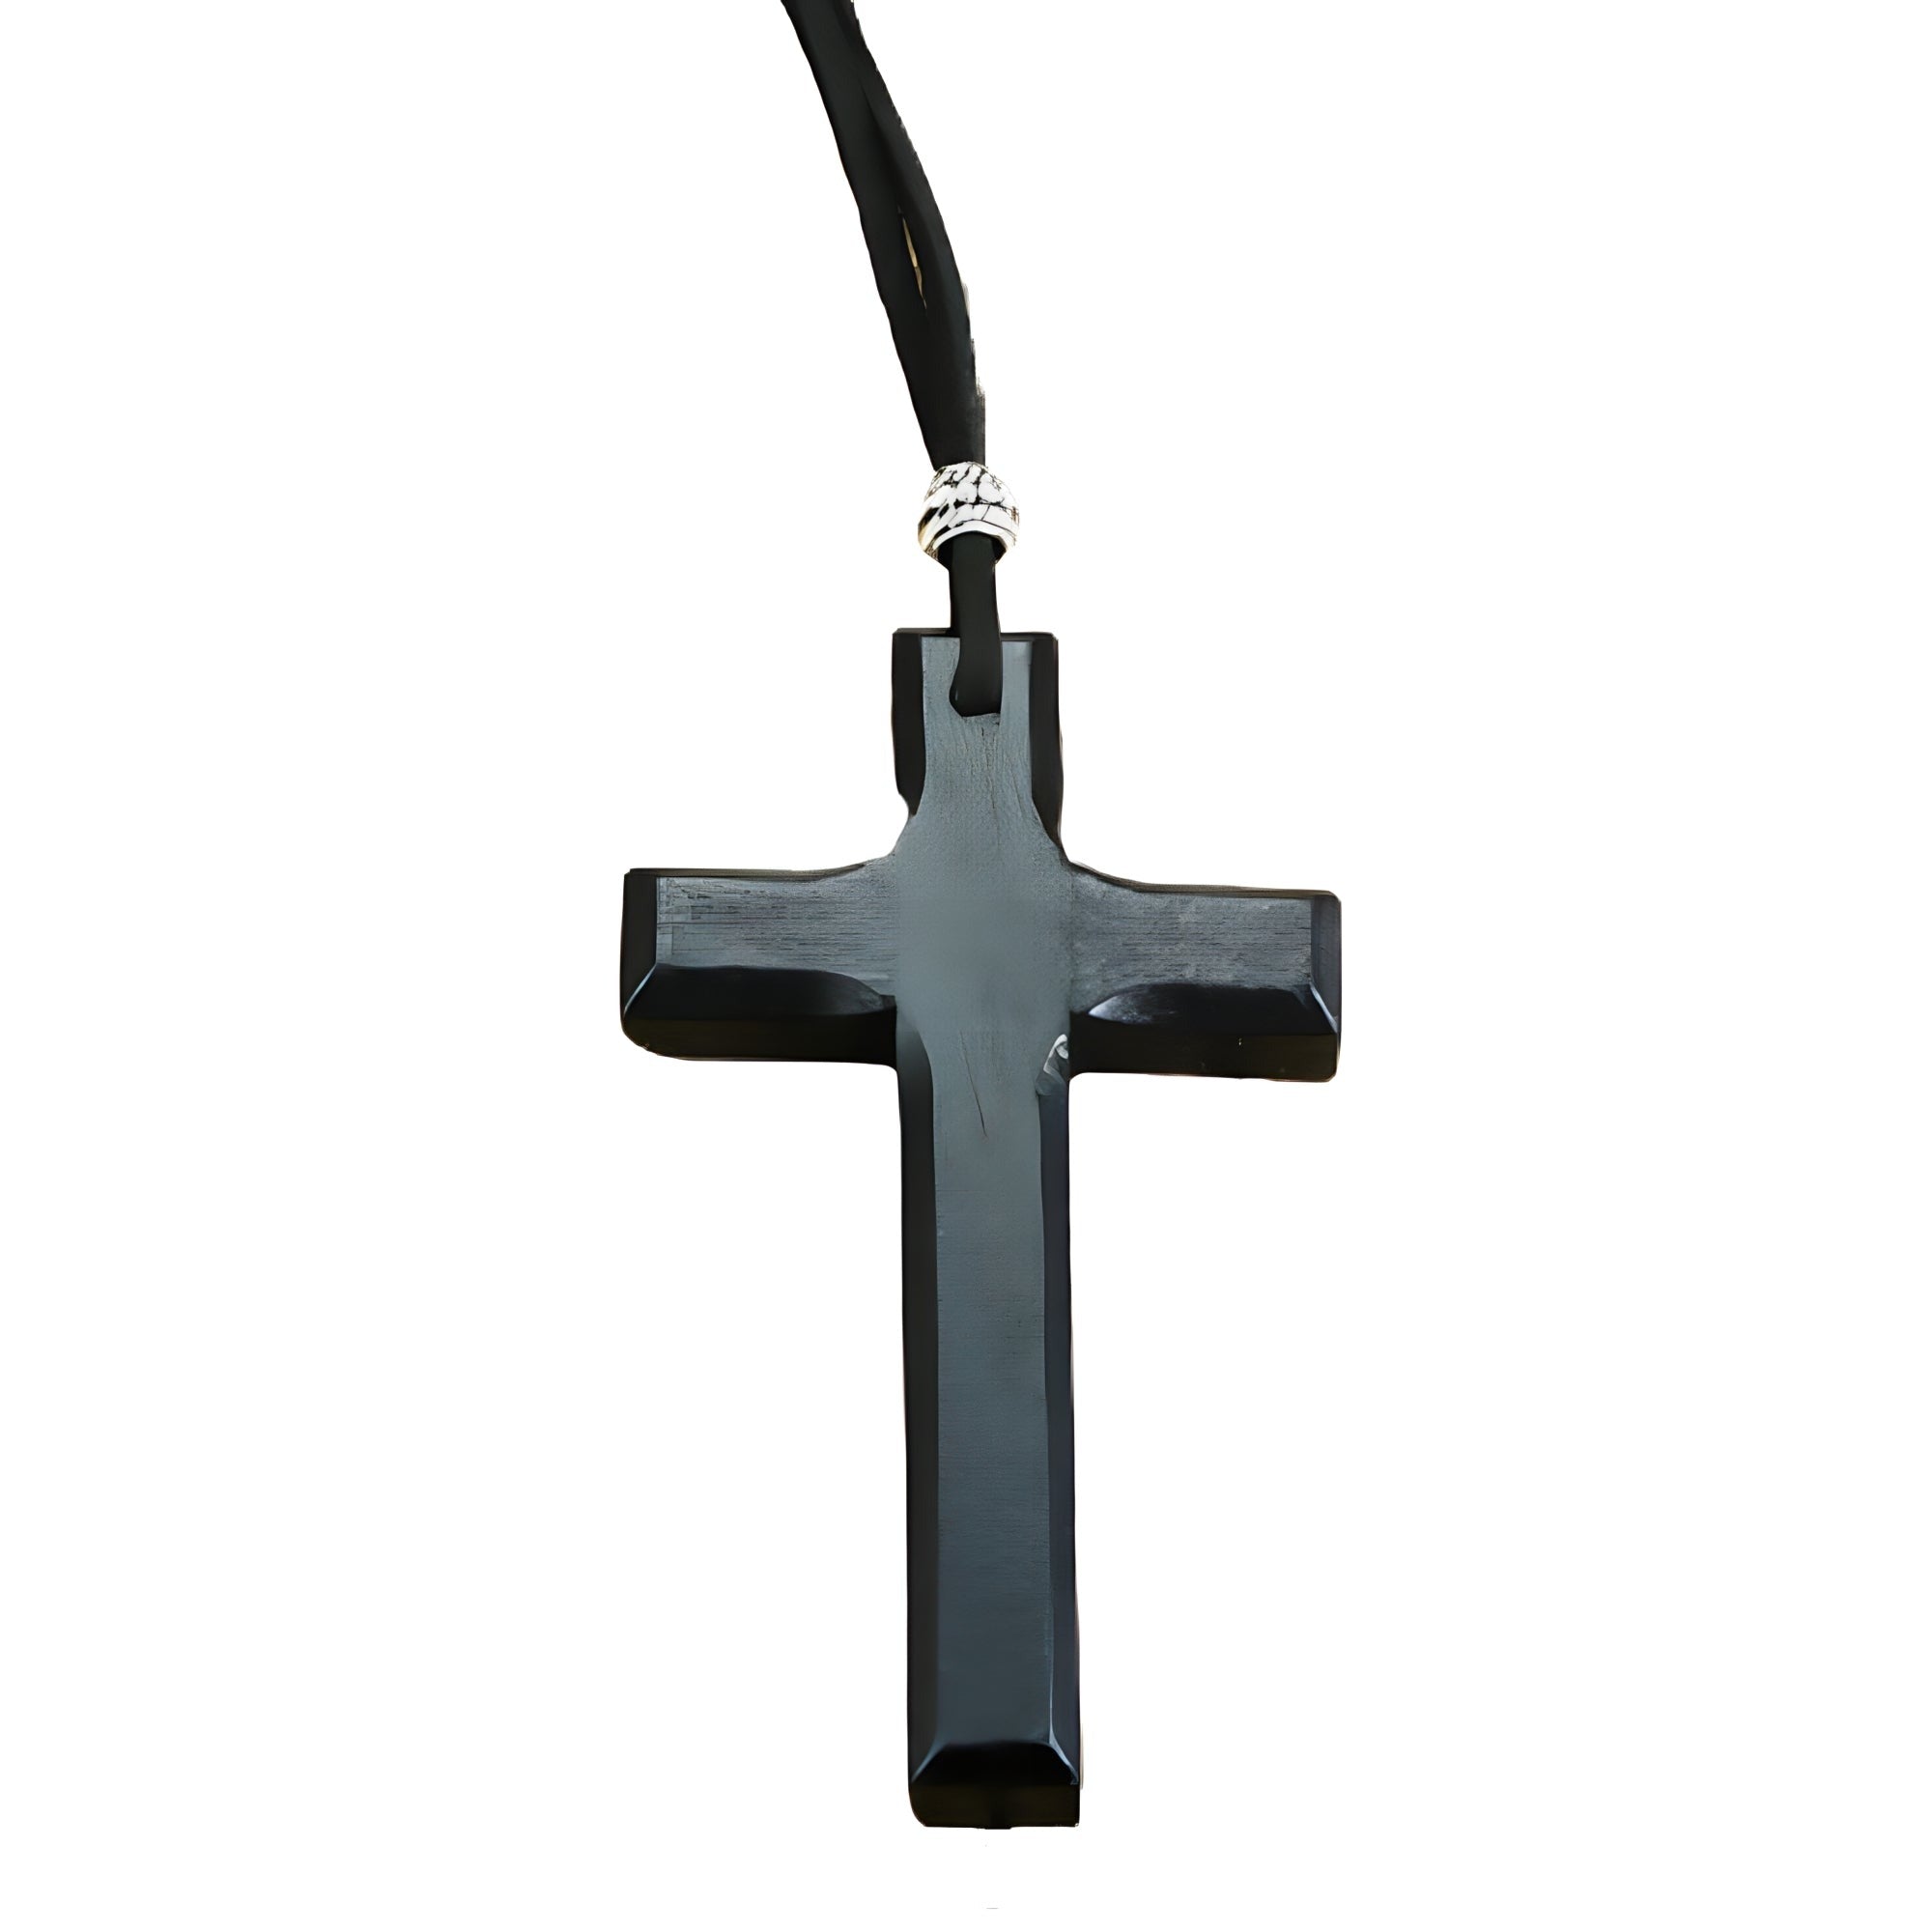 Vintage Wood Cross Leather Necklace